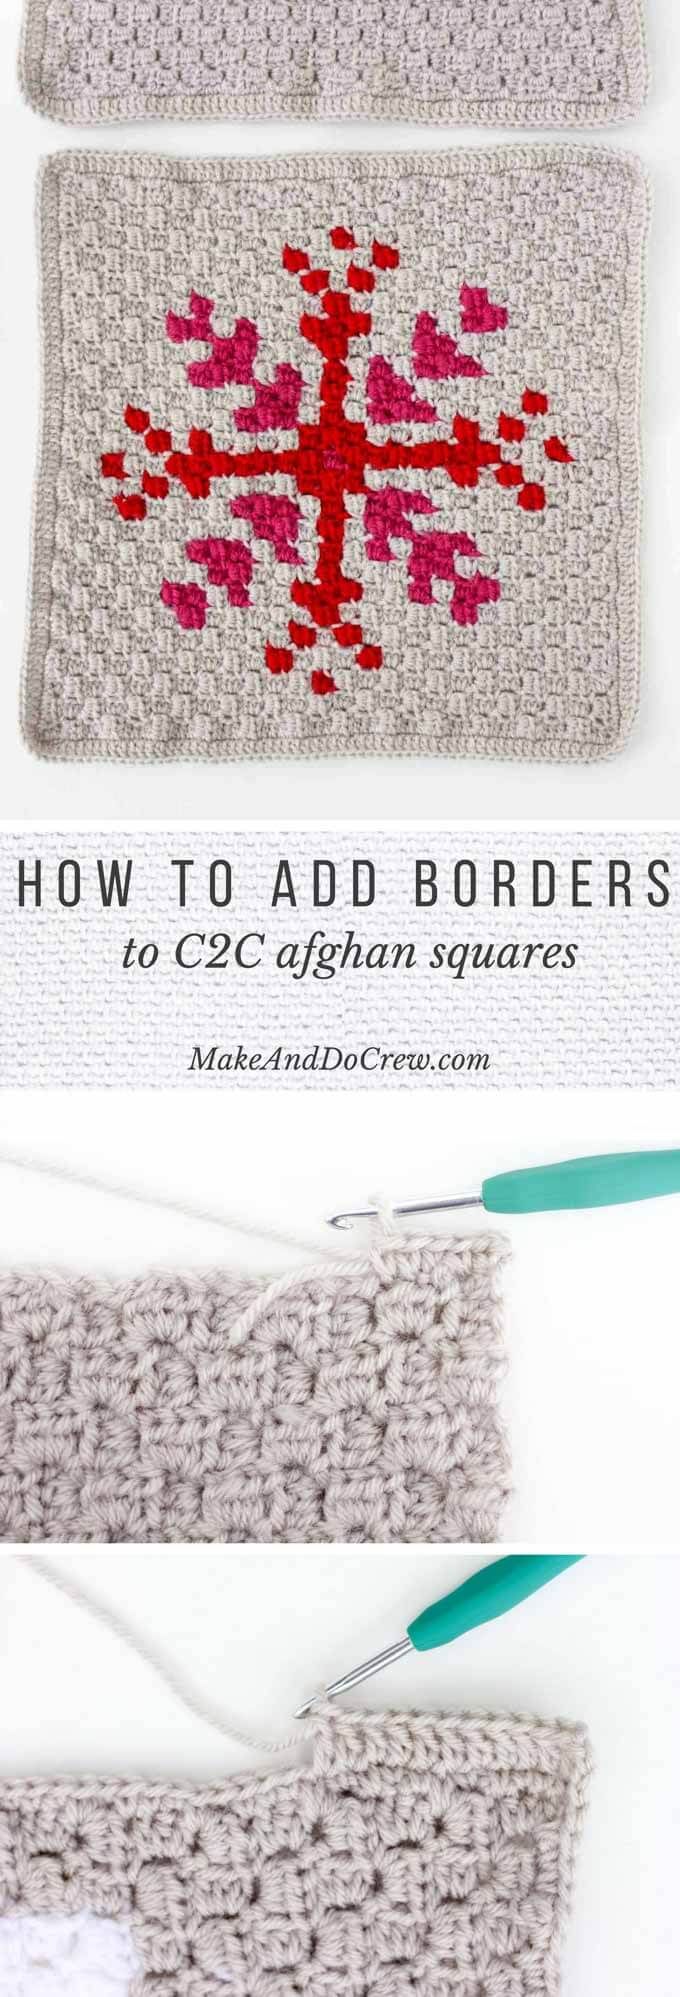 How To Add a Border to a C2C Afghan Block - Detailed Photo Tutorial